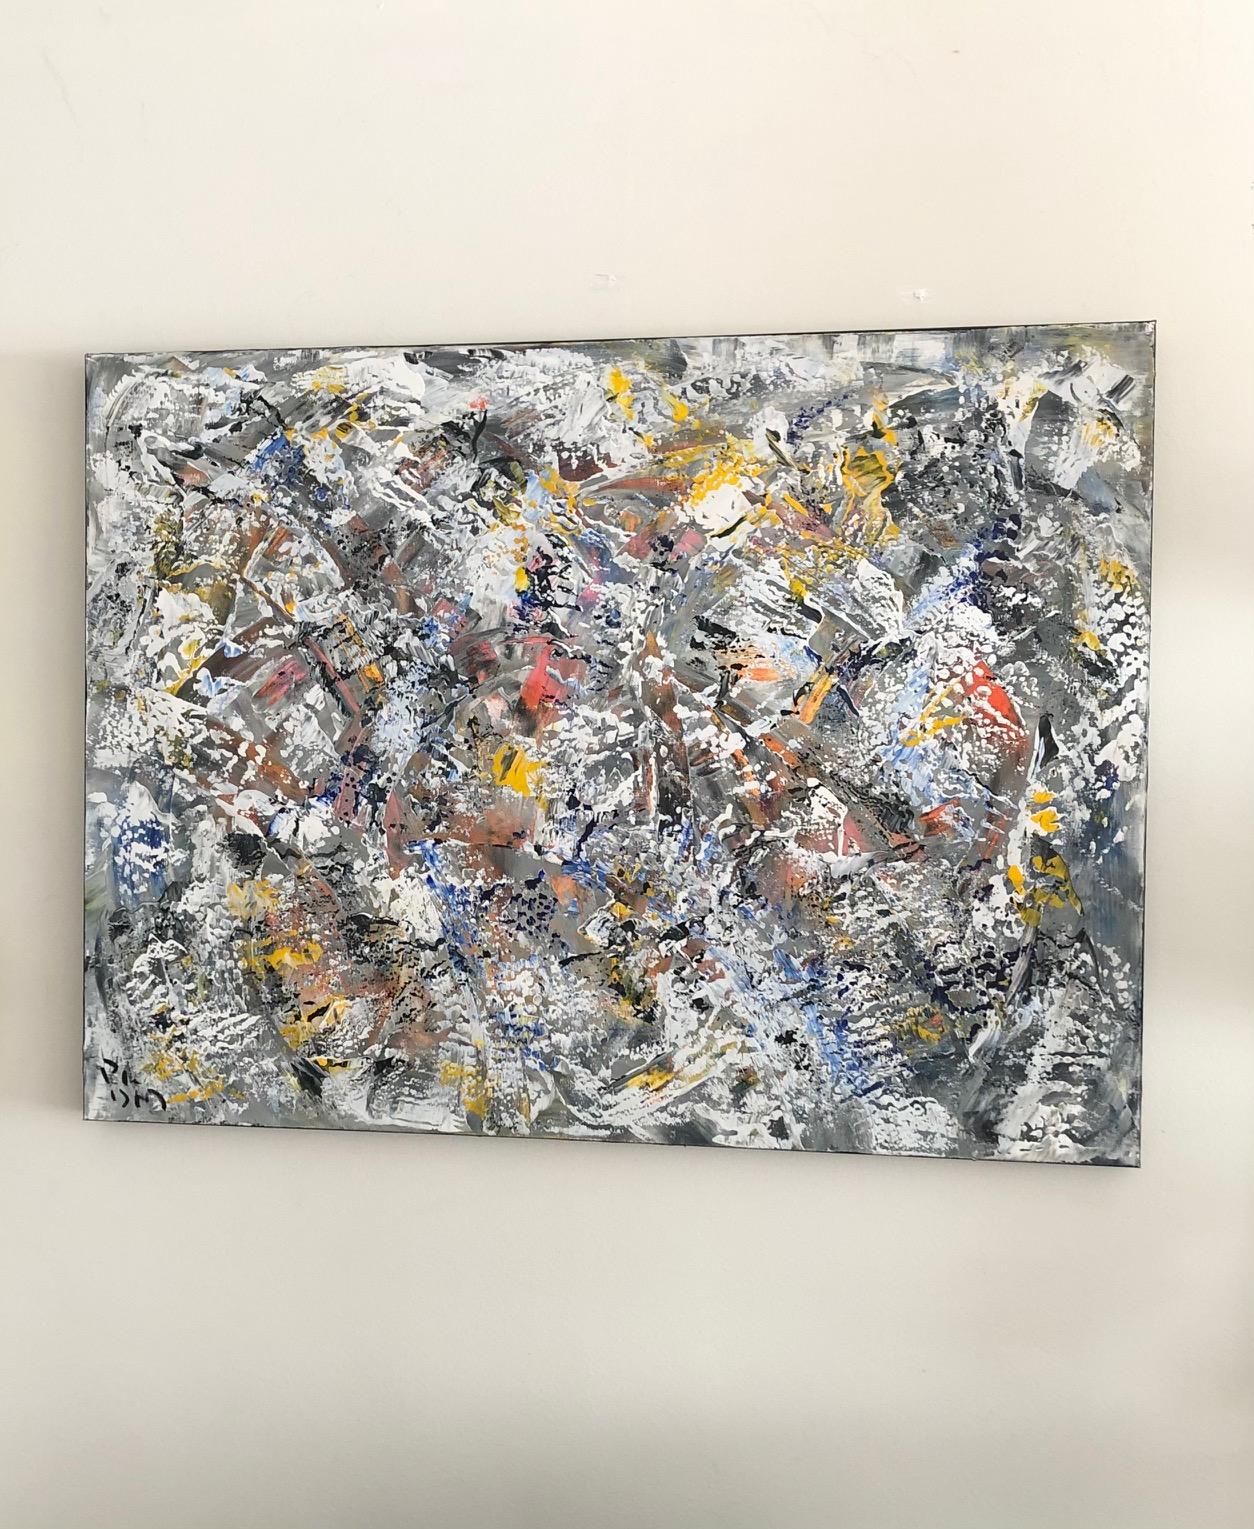 “Winter Vortex” is an original, one of a kind, white, yellow, black, gray, red, blue contemporary, acrylic on canvas abstract painting. Vibrant pops of color work in harmony to create this unique, contemporary work of art by Andrew Plum. Signed,